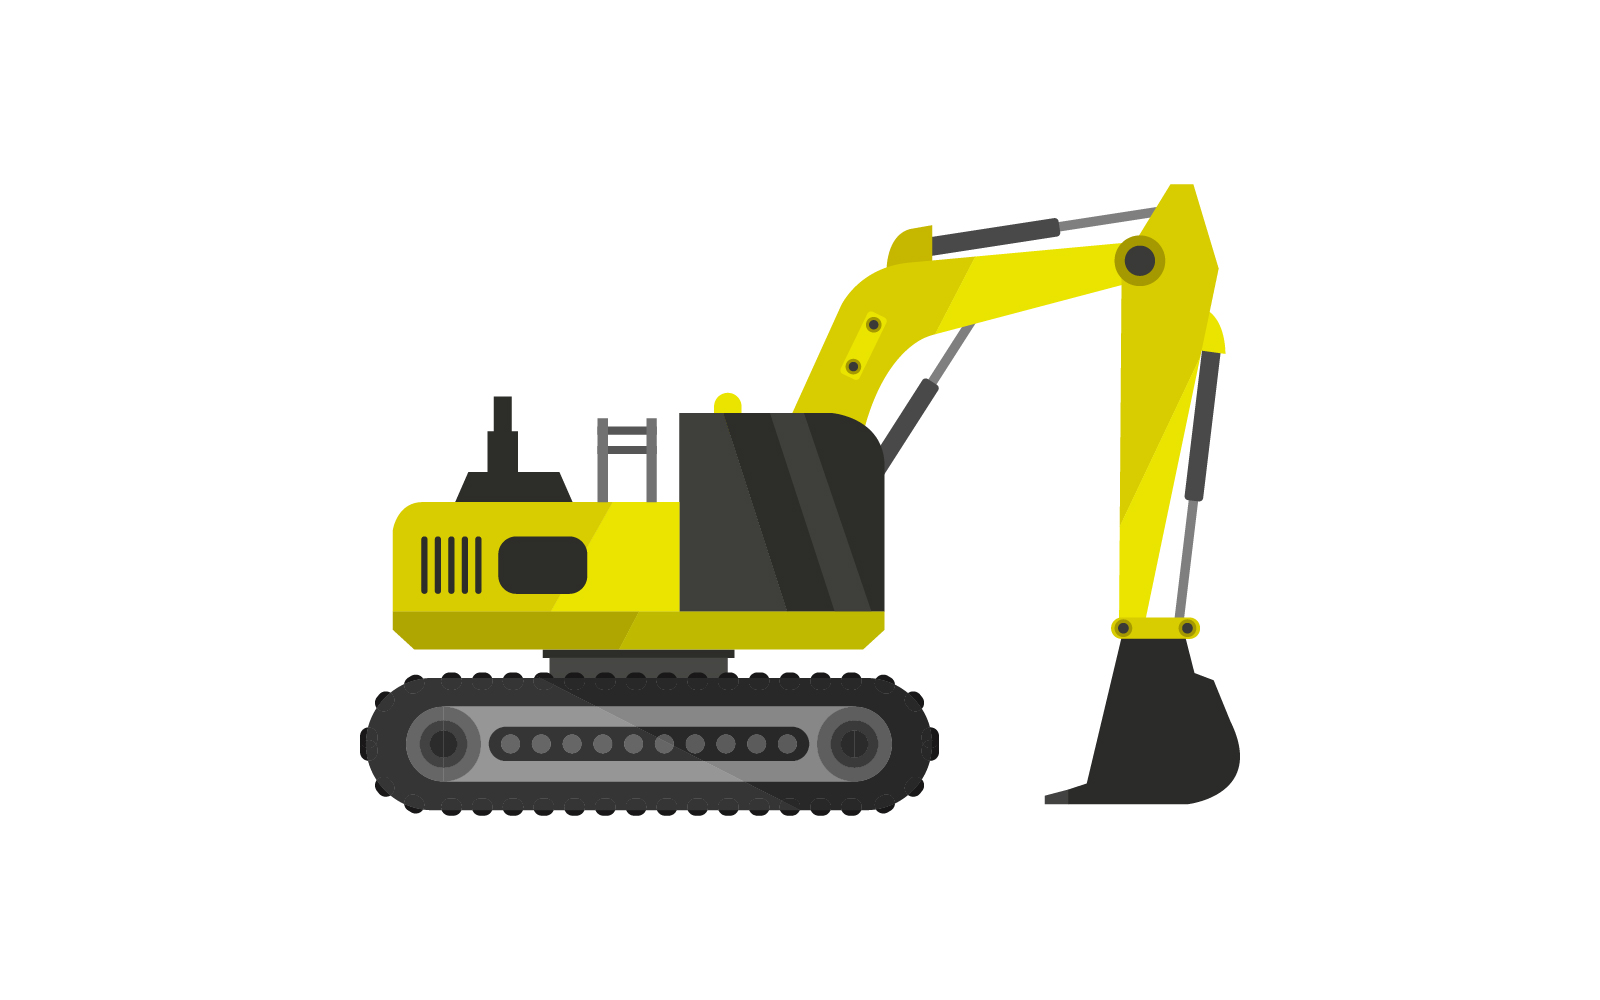 Excavator illustrated and vectorized and colored on a  background